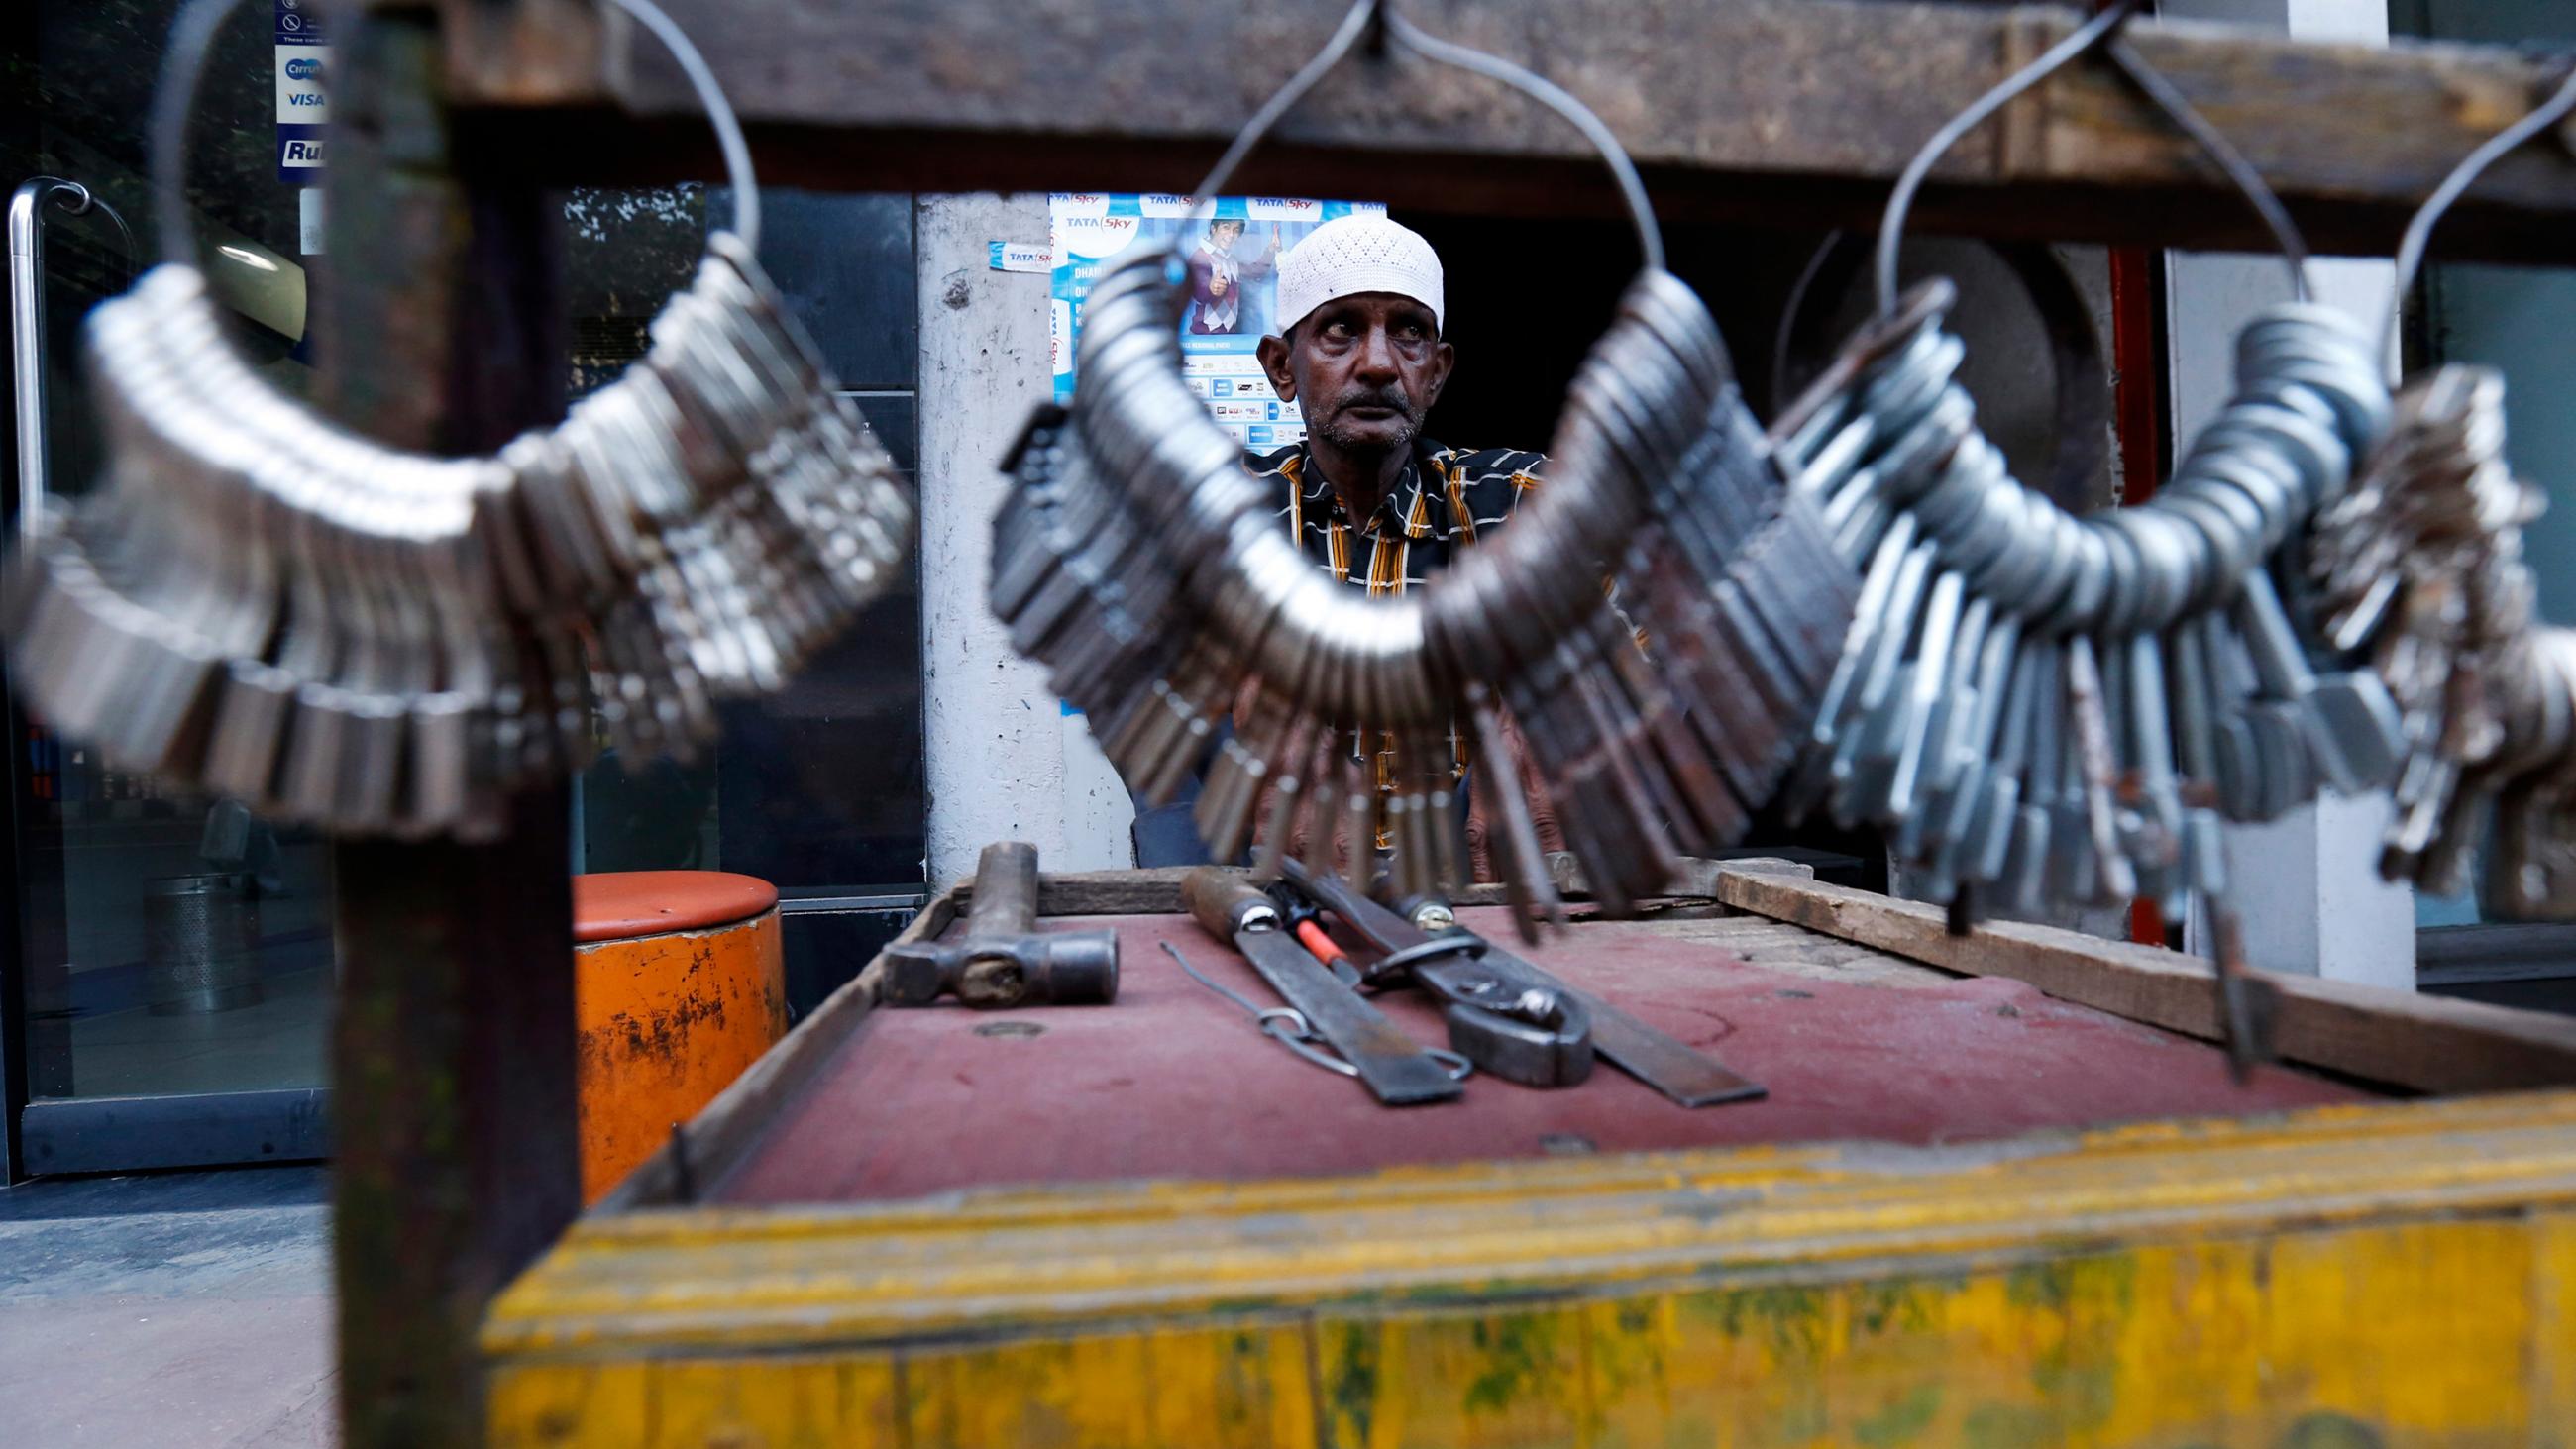 The photo shows a street vendor photographed through a large ring of keys hanging on his stand. 